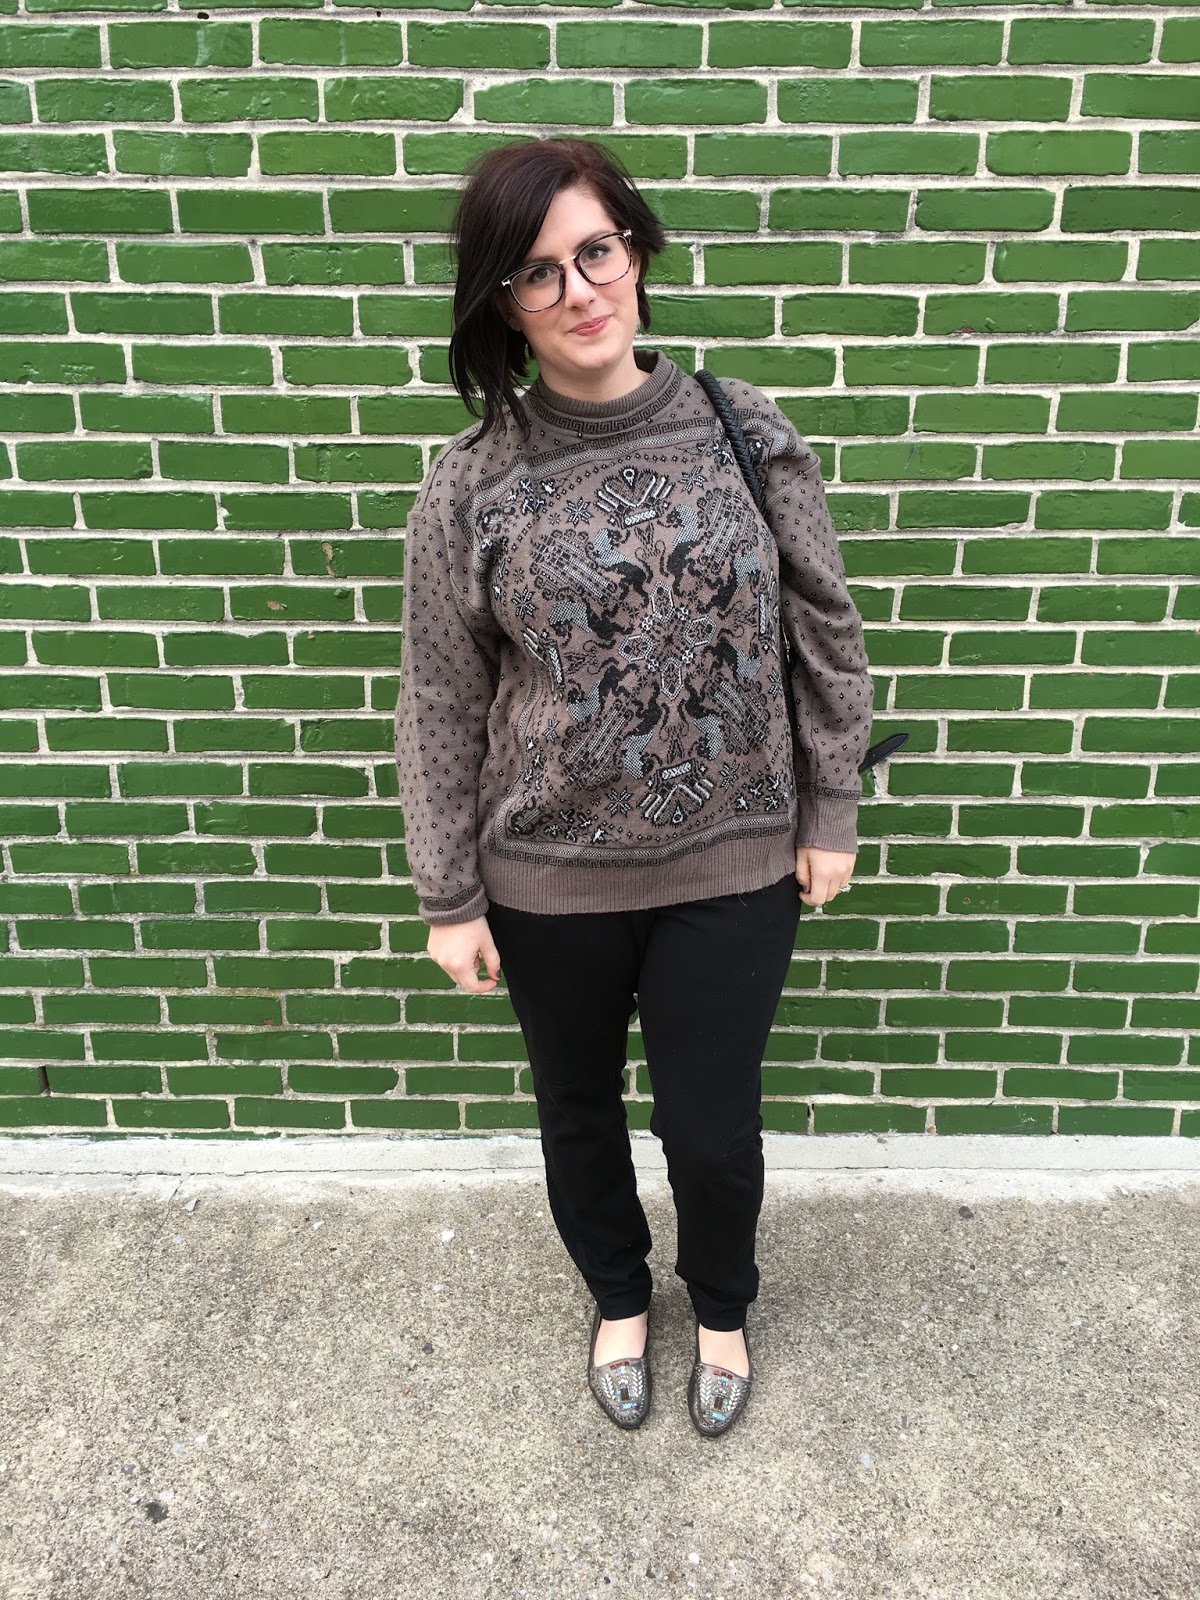 behind the leopard glasses: sweater weather once again